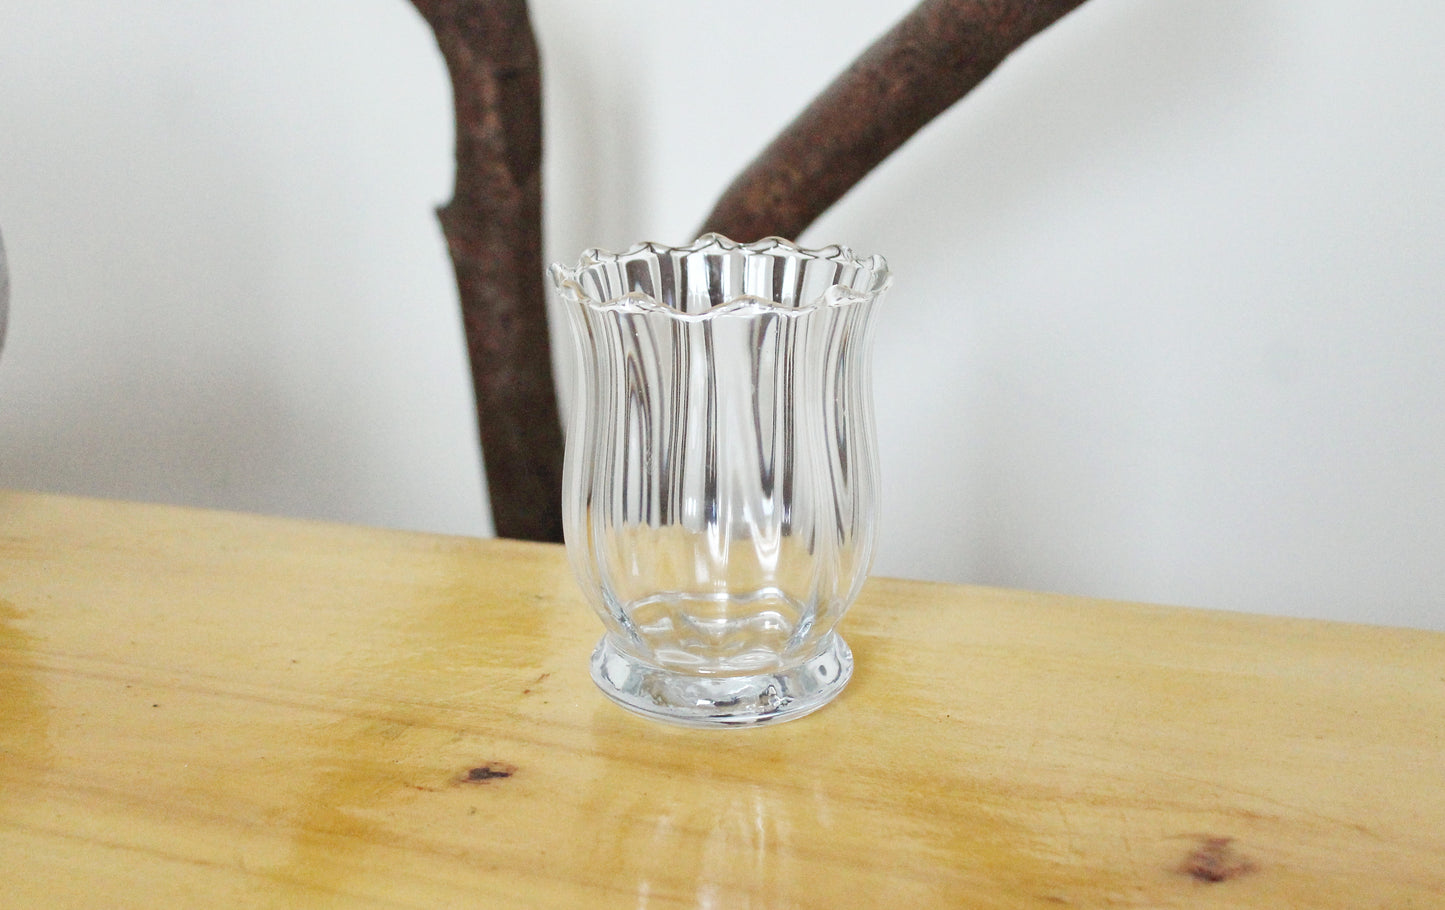 Small vintage glass vase 4.3 inches - beautiful vintage vase - Germany small vase - home decor vase - 1980s